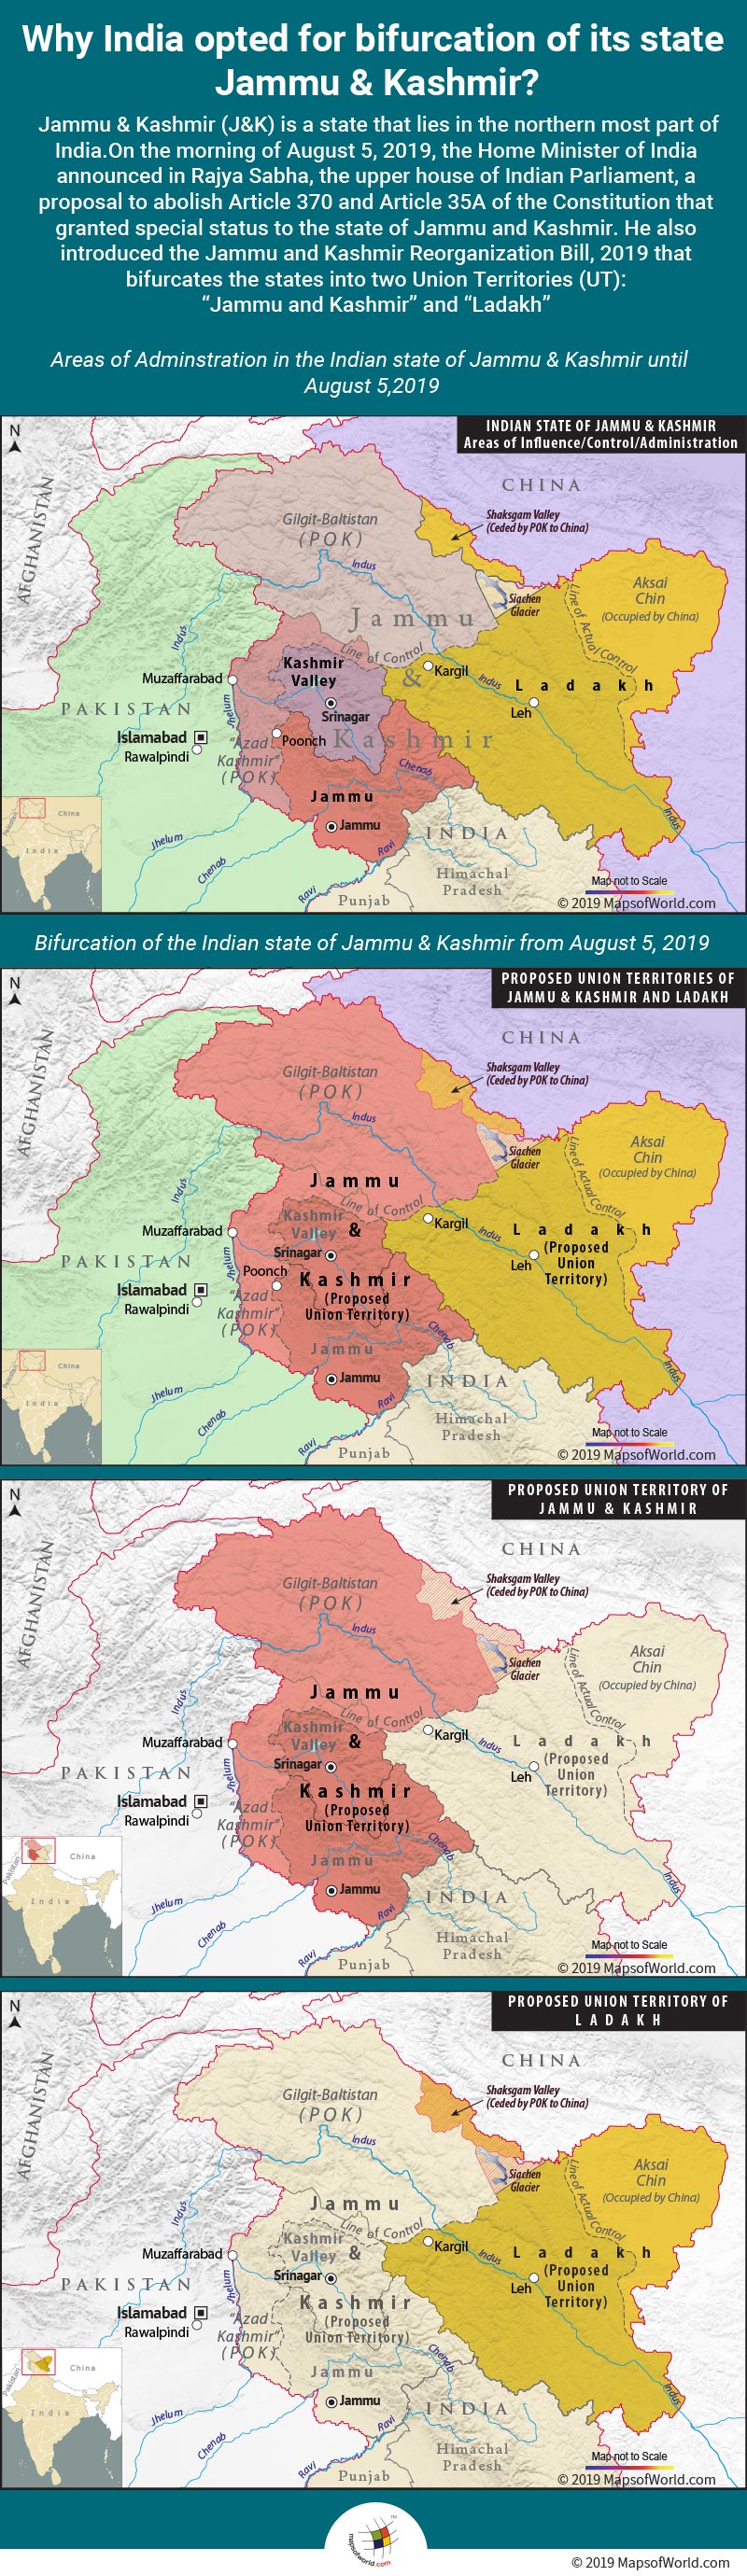 Infographic Giving Details on Why India Opted for Bifurcation of its State Jammu and Kashmir